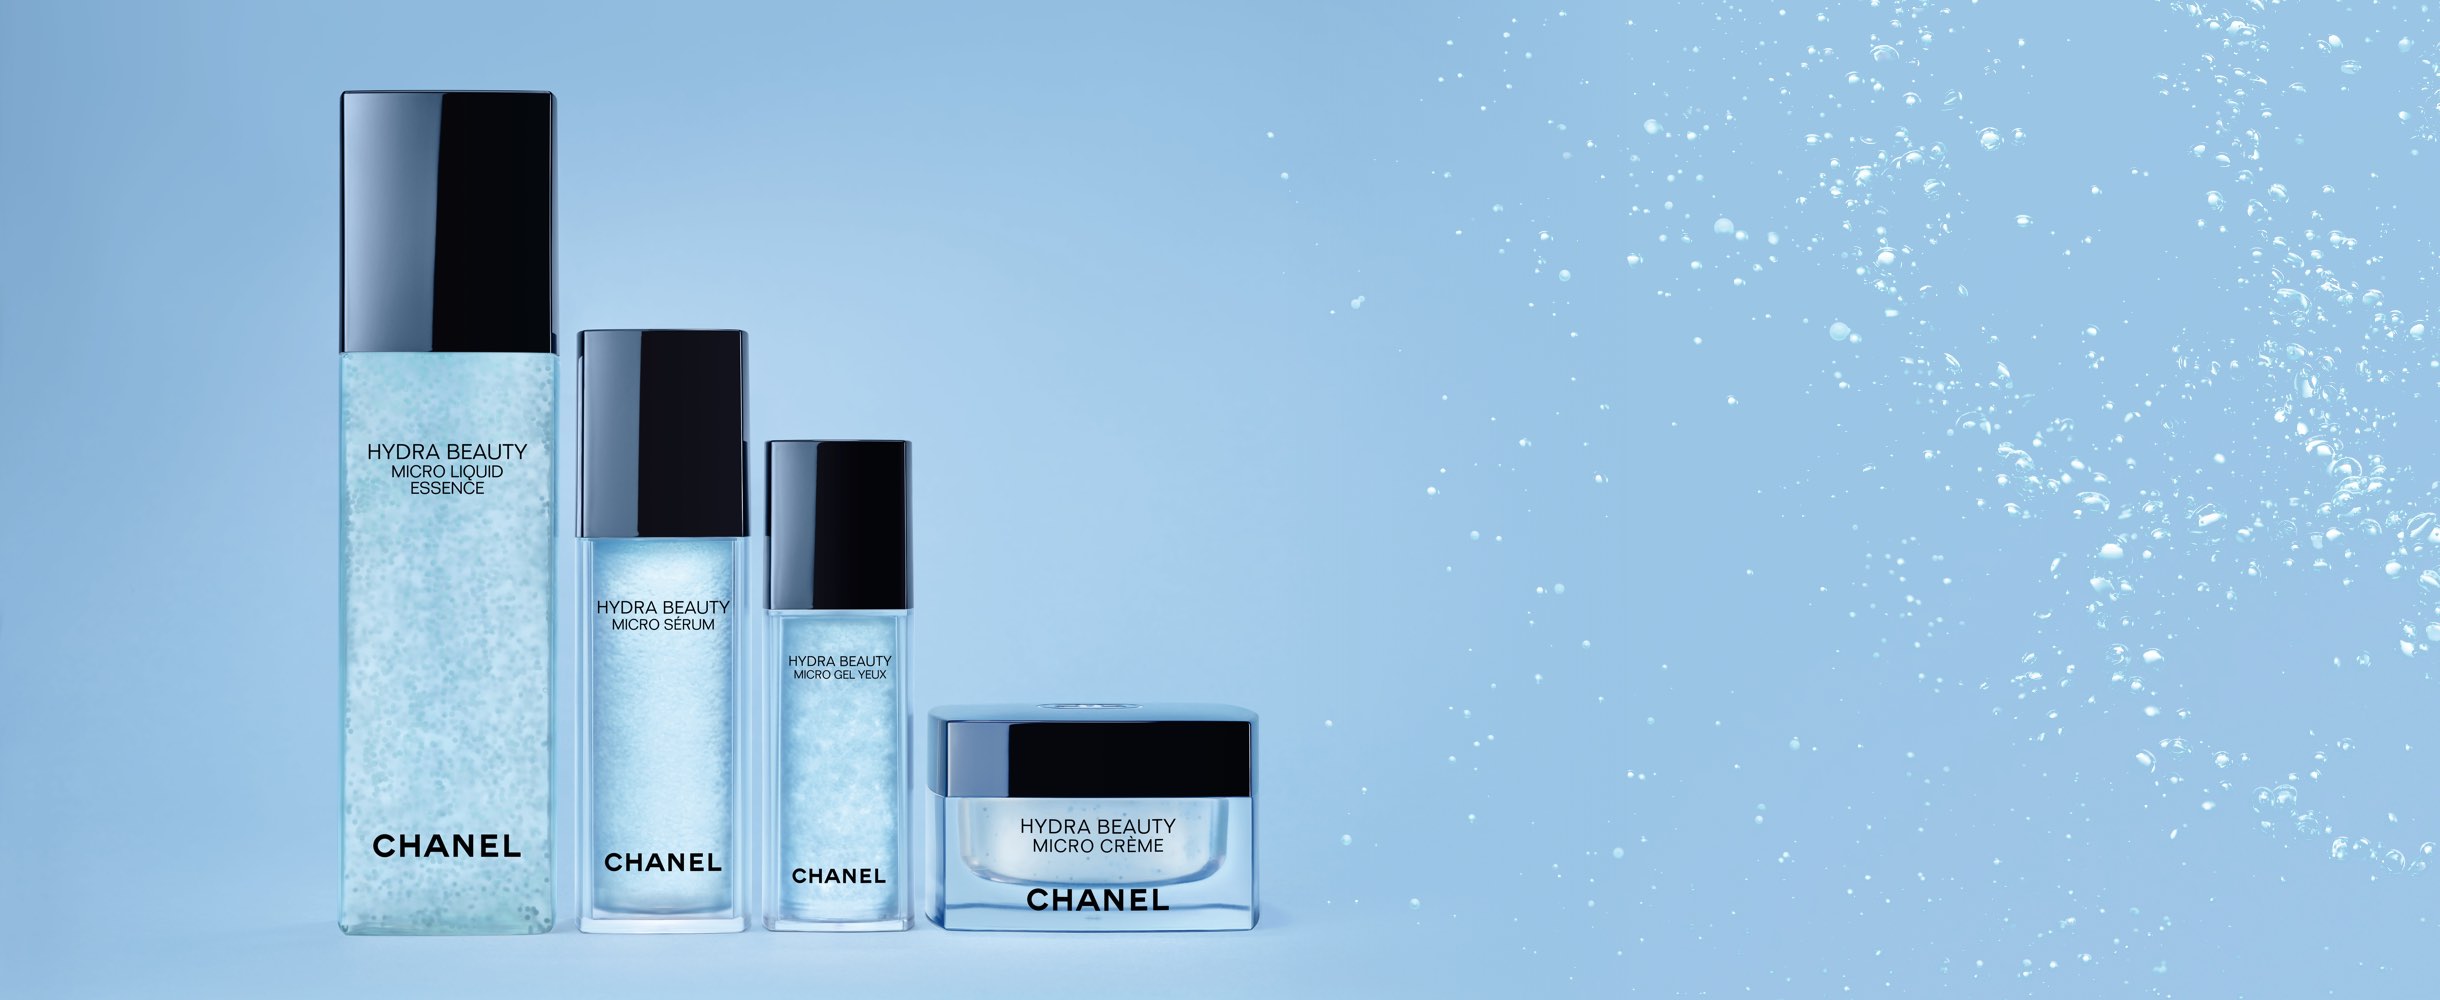 Chanel Review > Hydra Beauty Micro Liquid Essence (Refining Energizing  Hydration/ Boosting essence lotion)